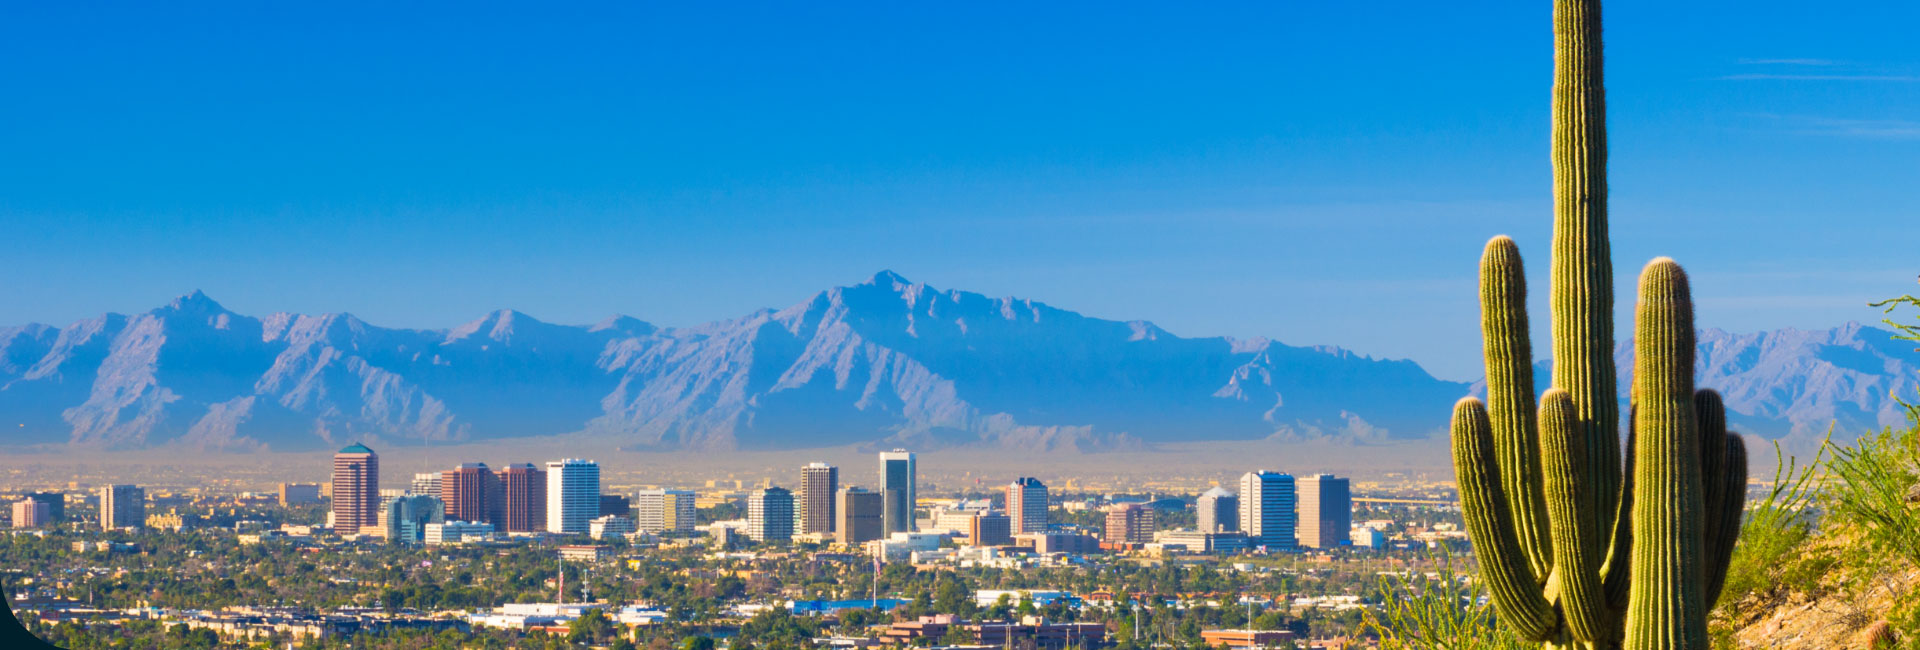 Phoenix skyline with the mountains